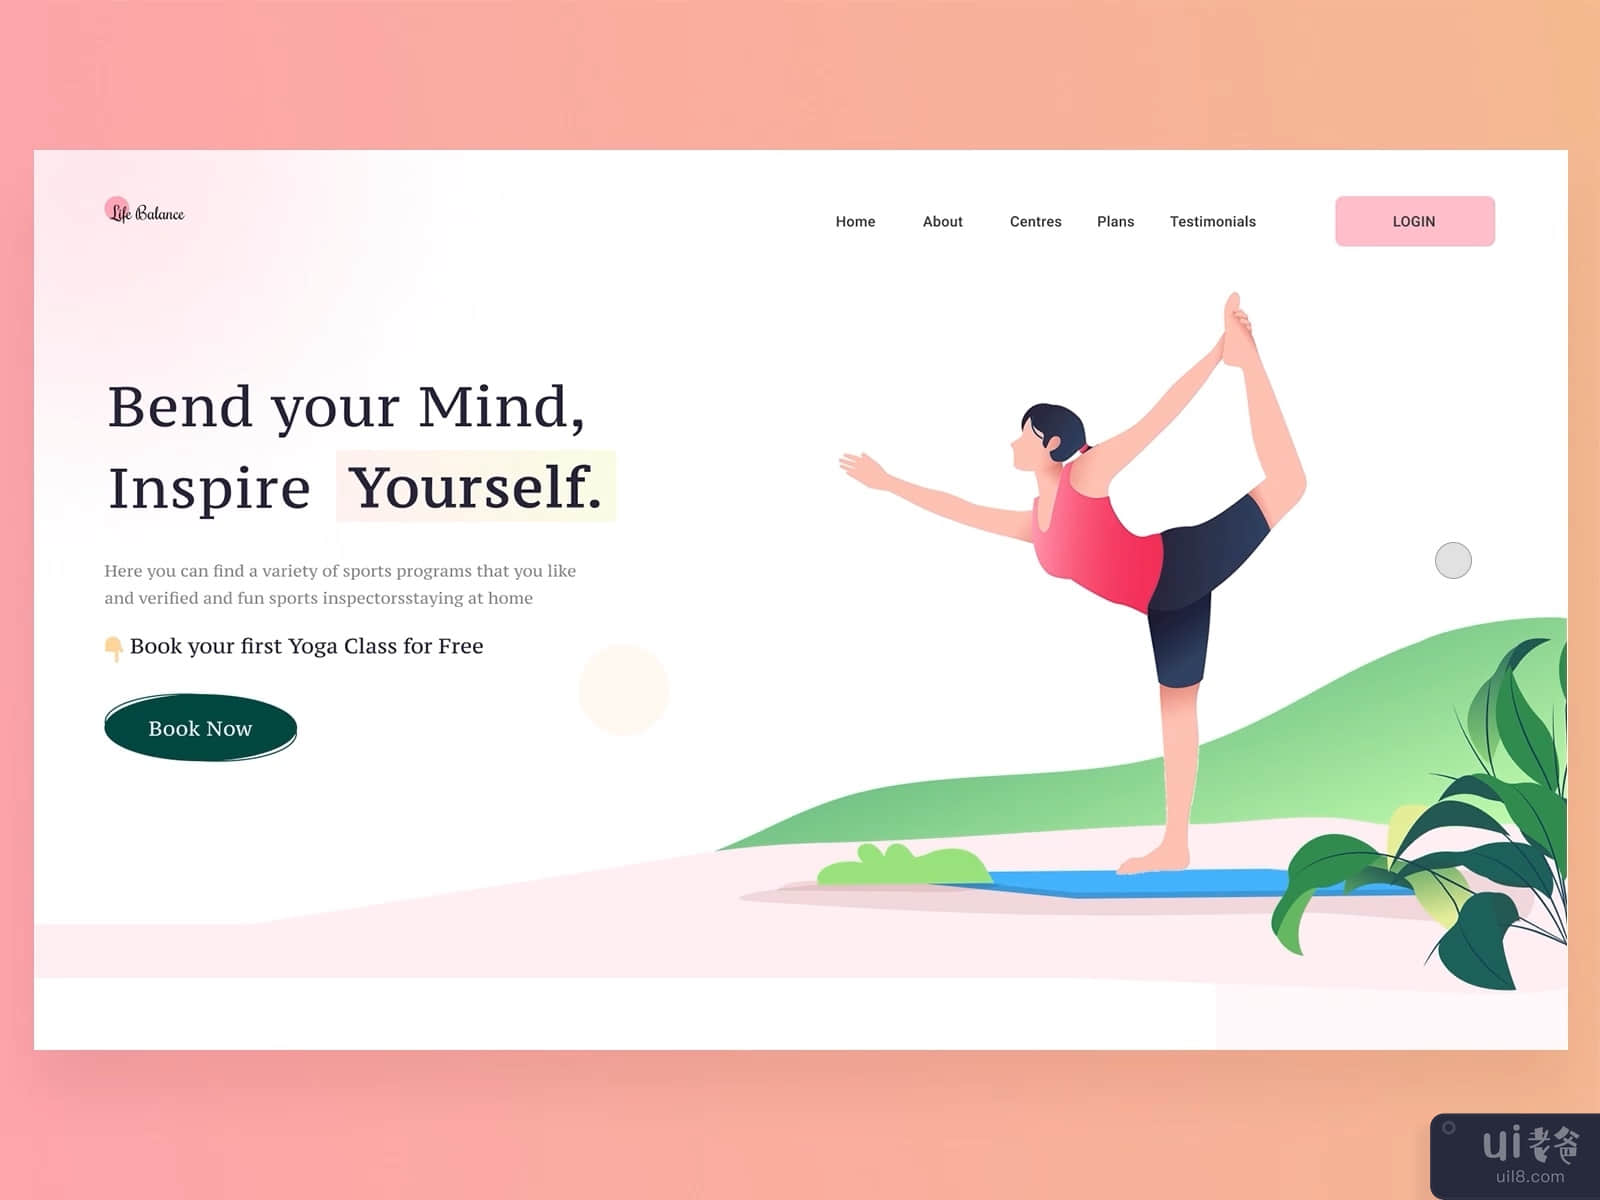 Awesome😊 page layout for a yoga🧘 website